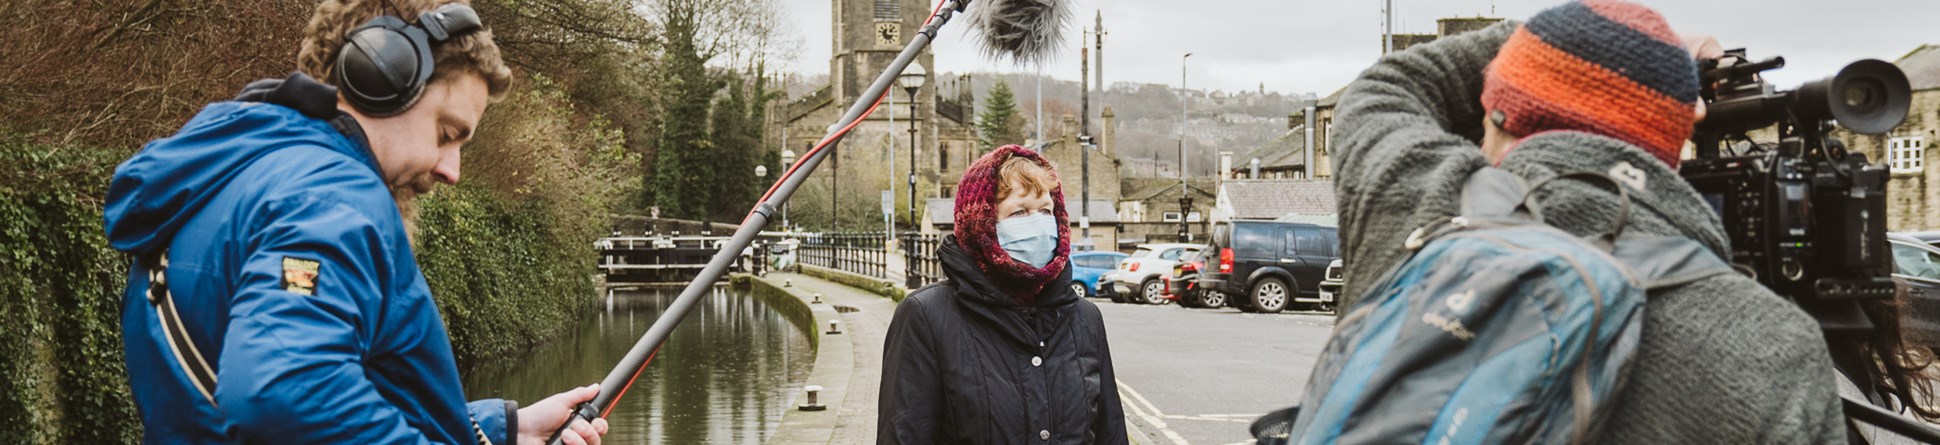 A woman wearing a mask is interviewed with a canal and church in the background. Camera crew are left and right in the foreground.